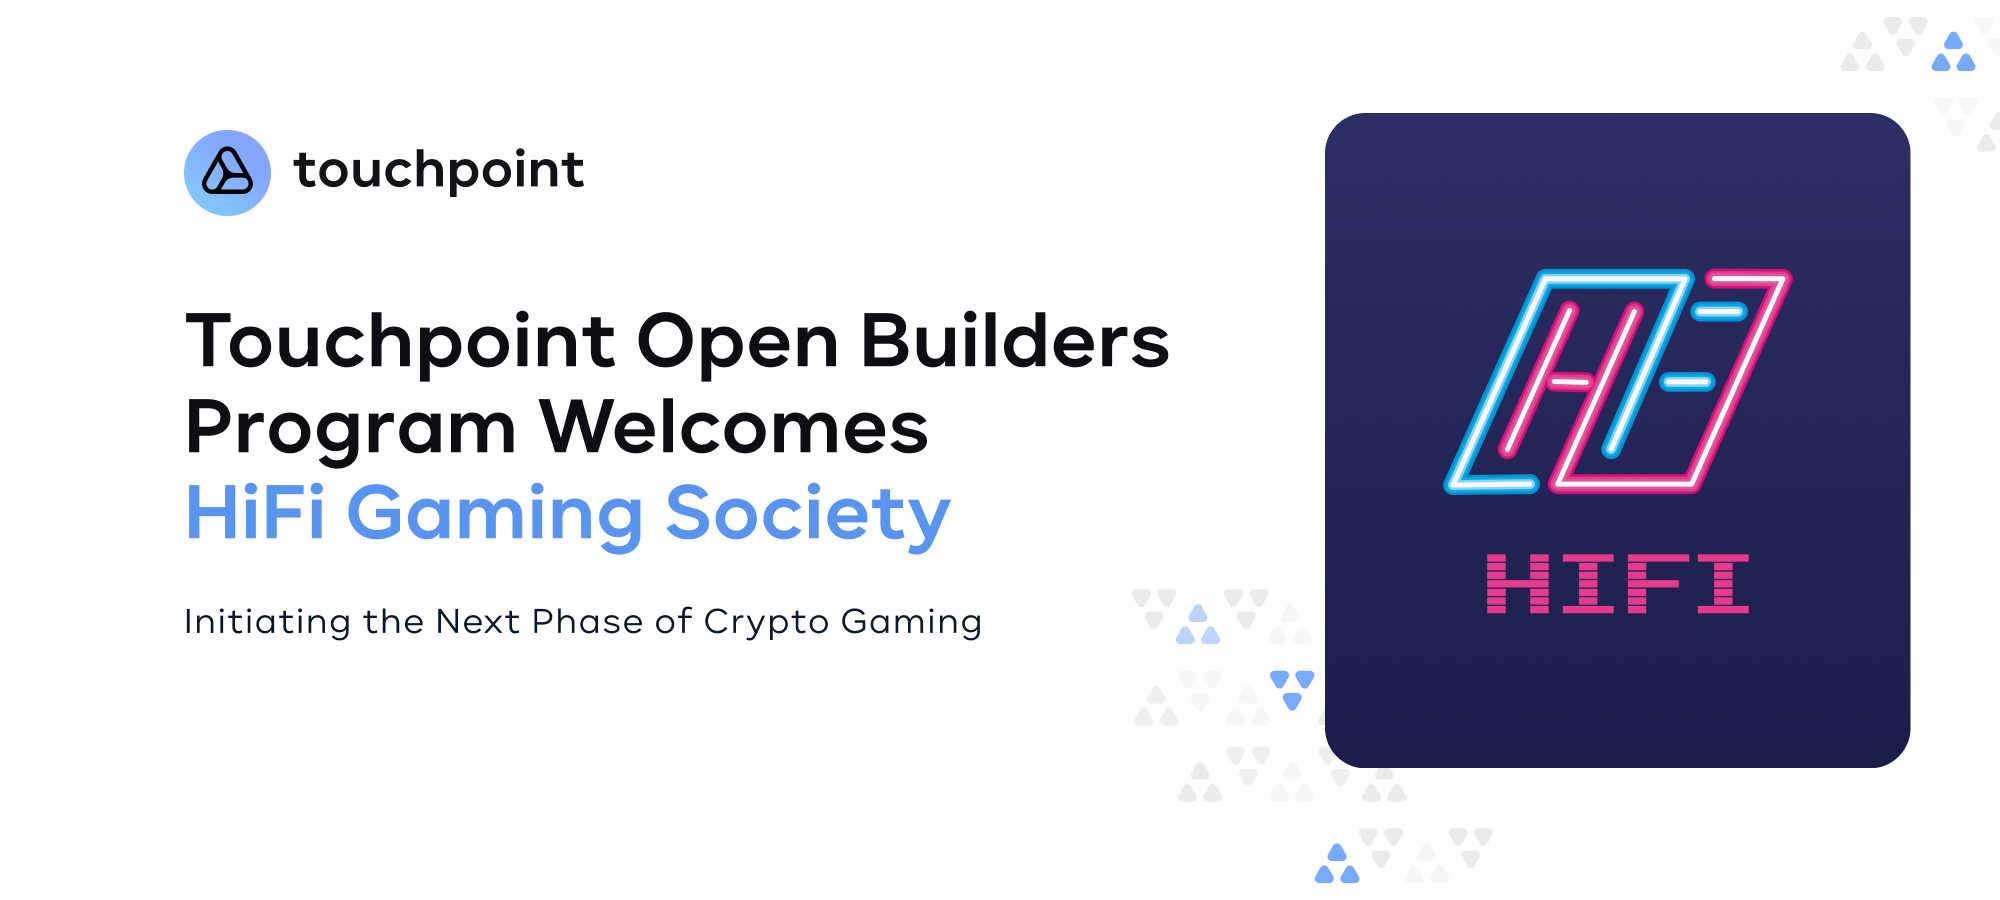 Touchpoint Open Builders Program Welcomes HiFi Gaming Society